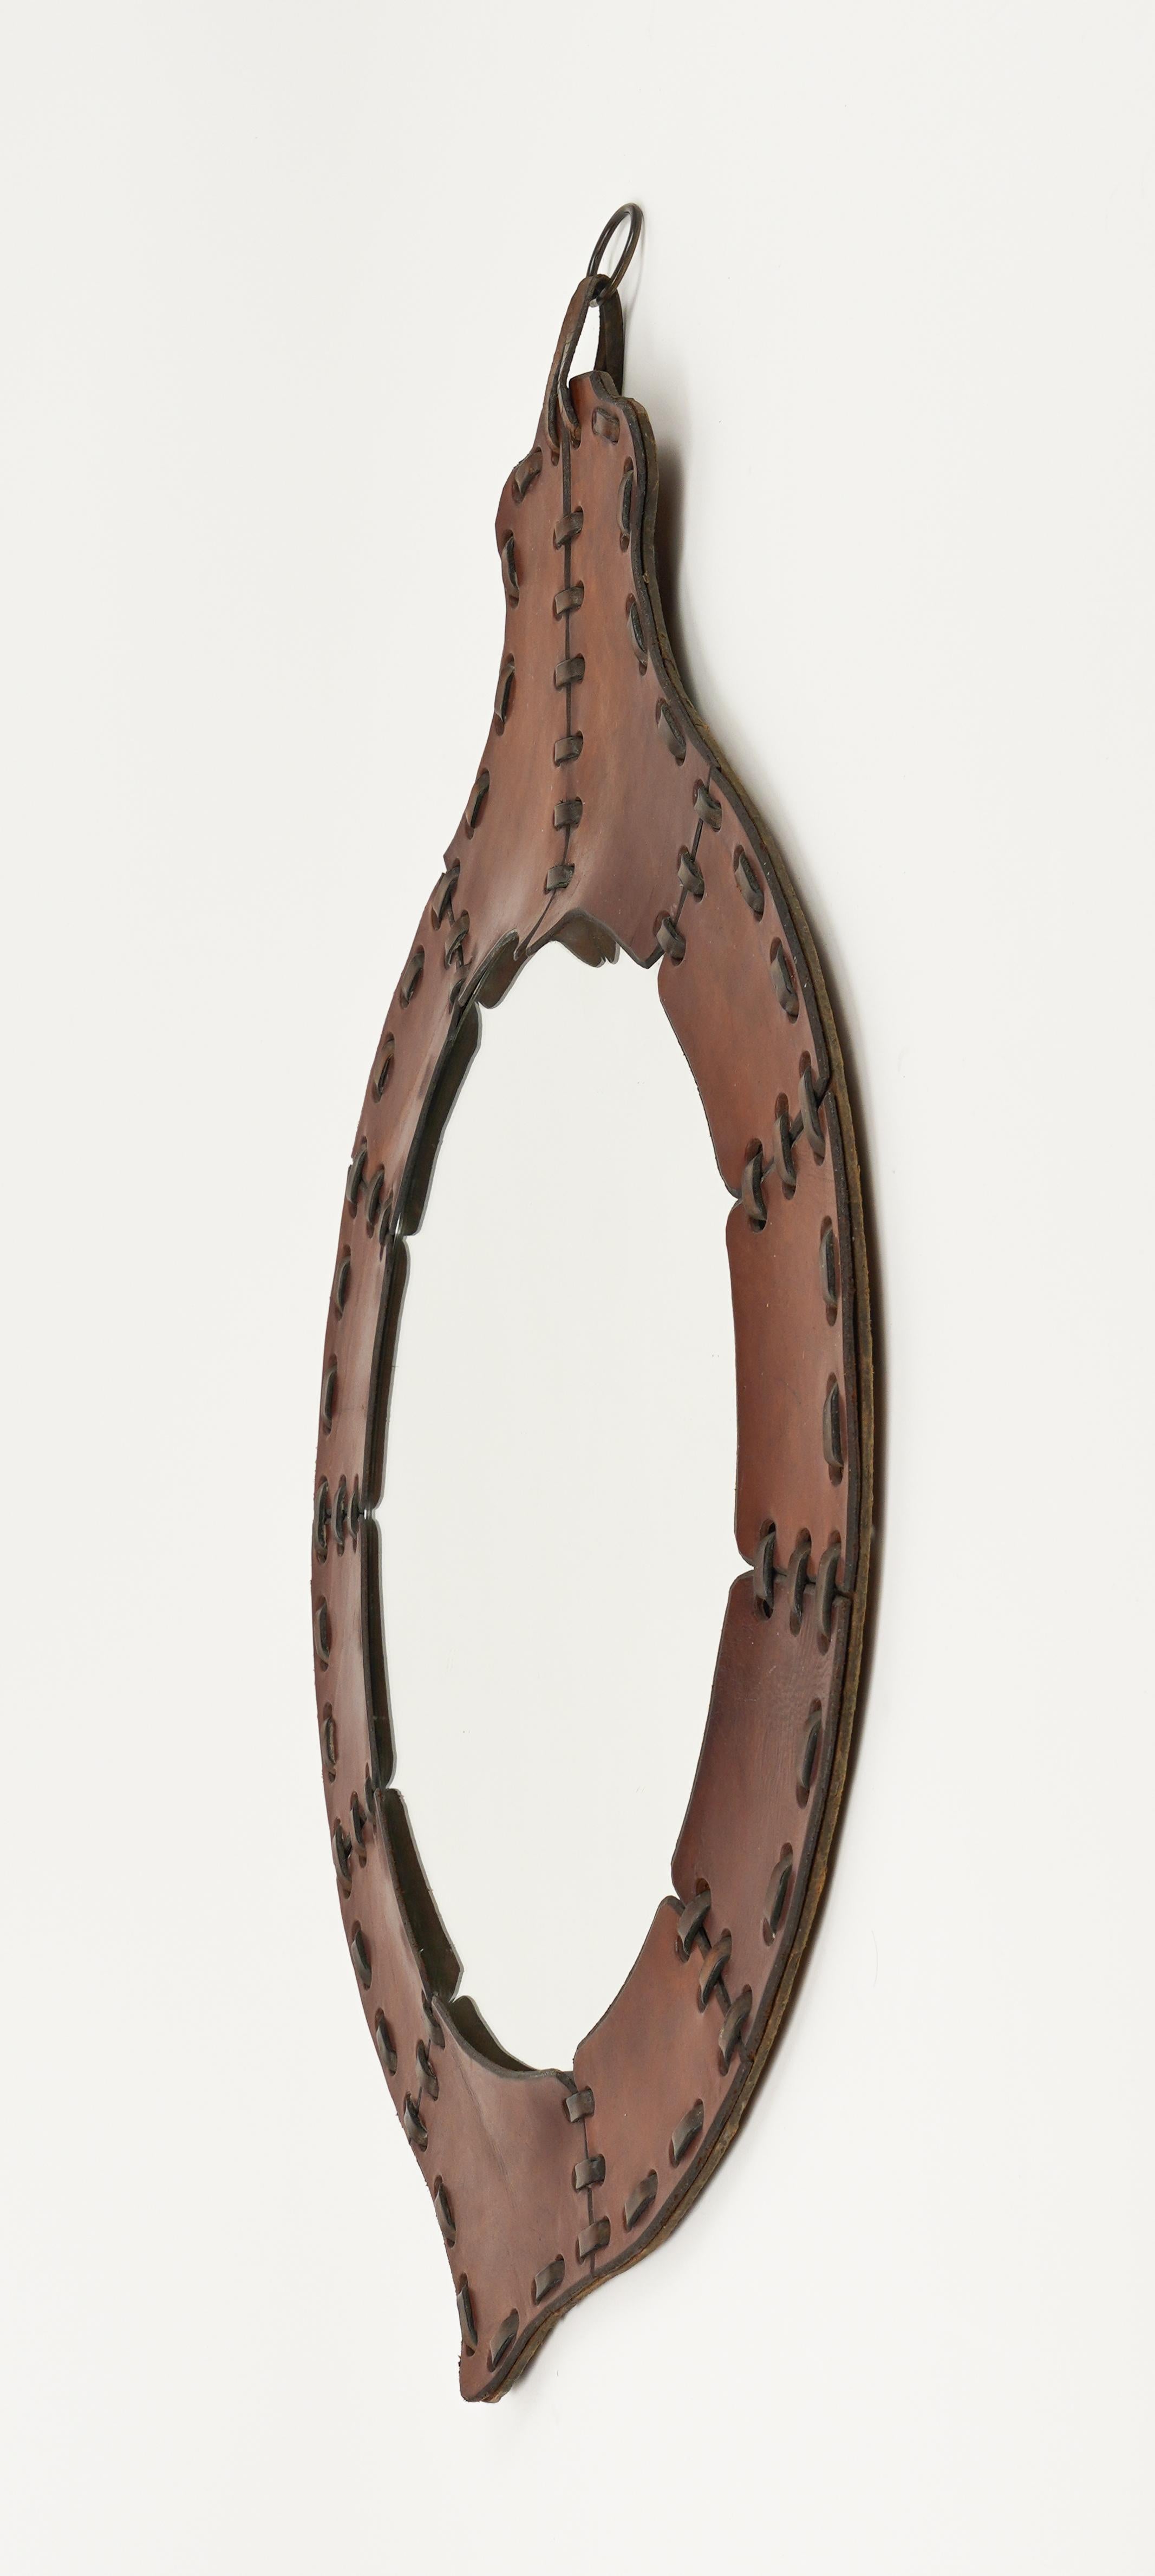 Midcentury Teardrop Wall Mirror in Leather, Italy 1960s For Sale 3